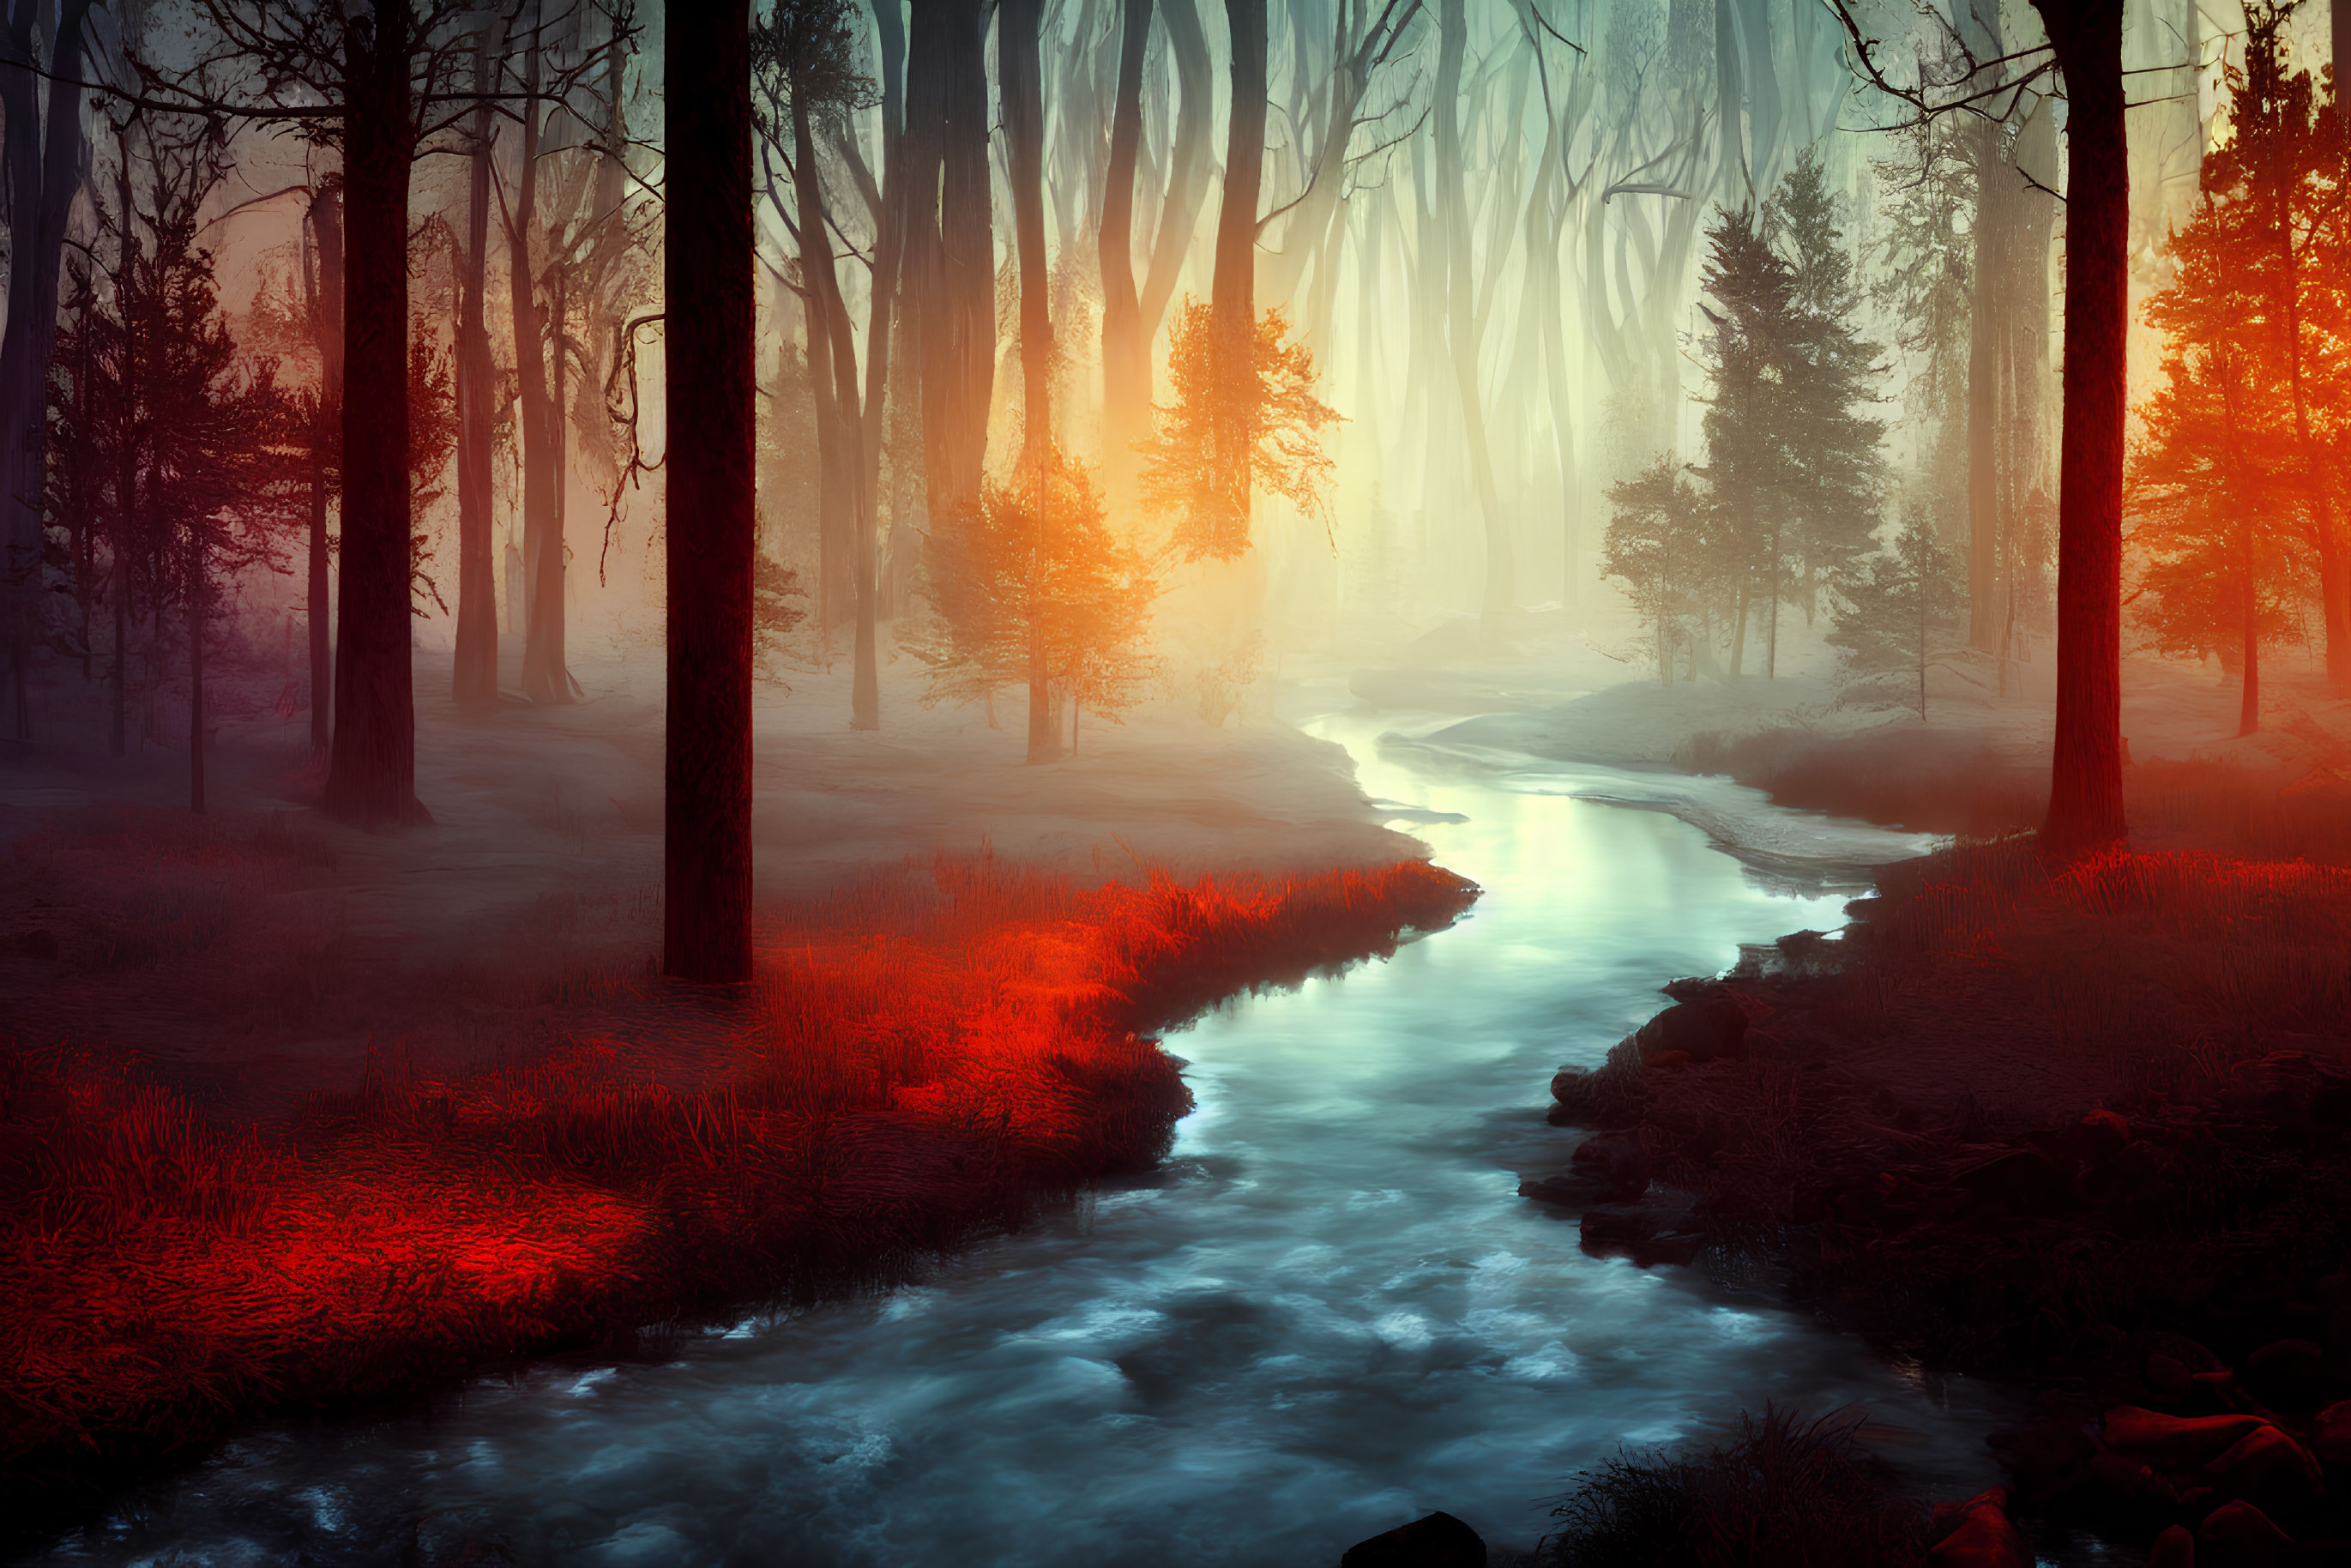 Mystical forest scene with blue stream and red foliage